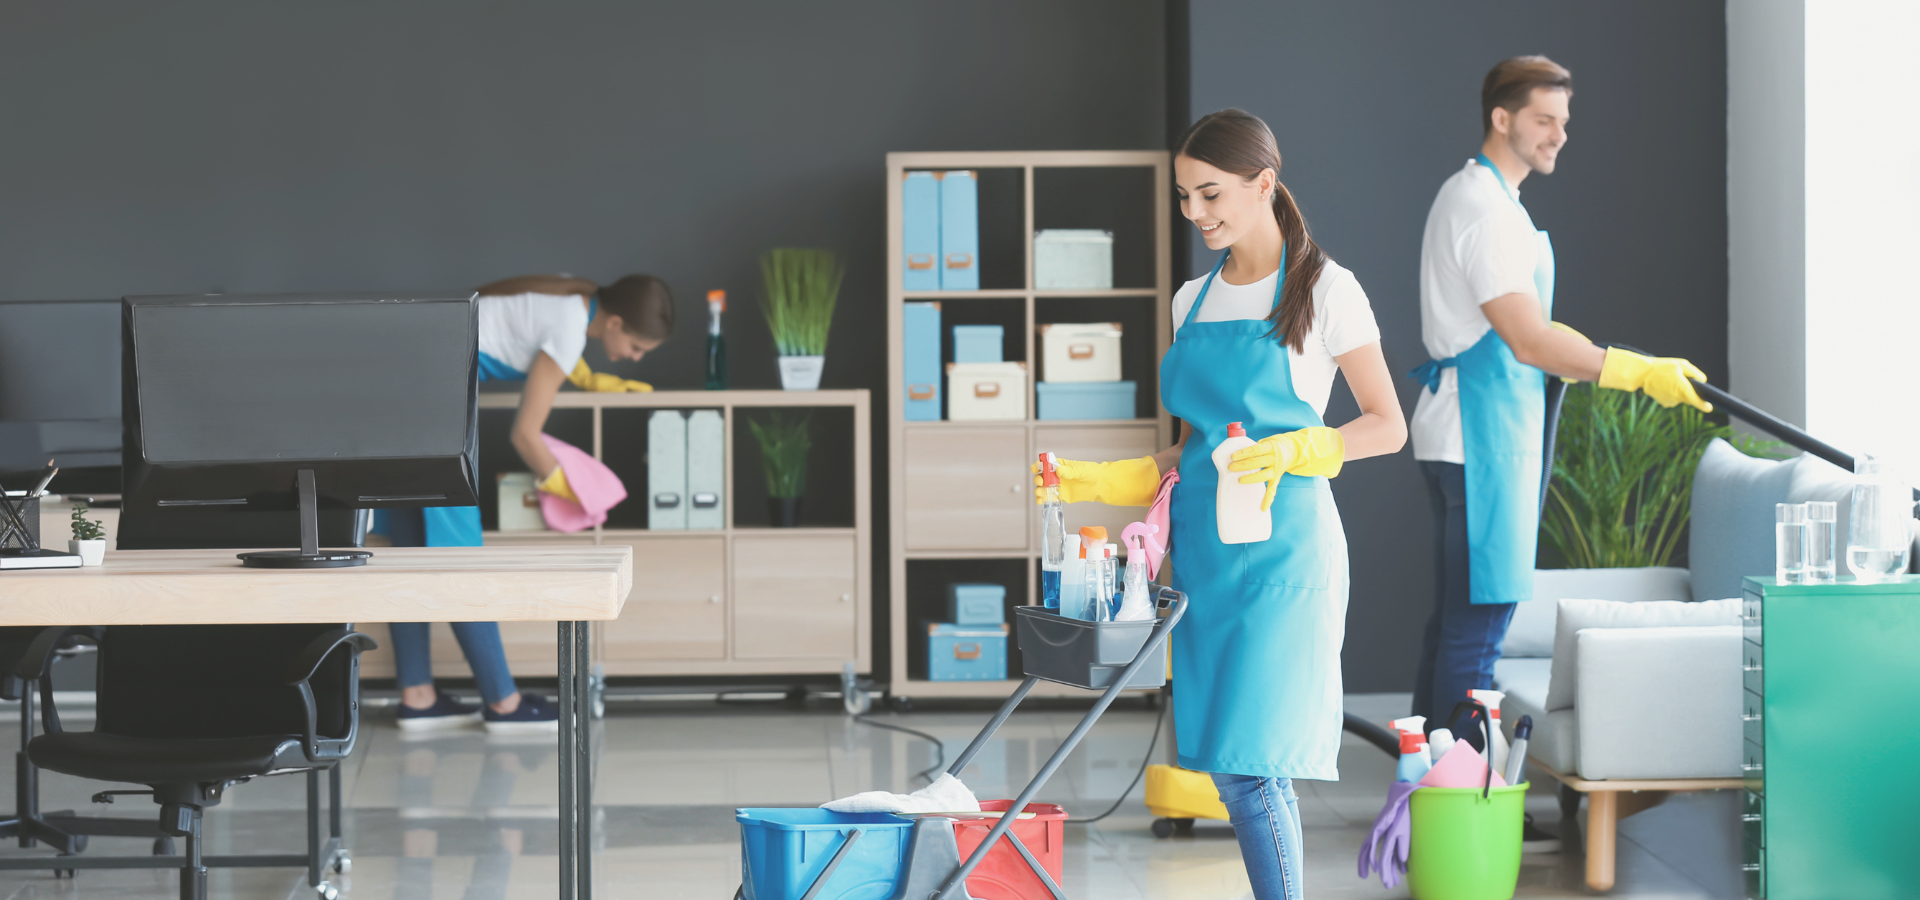 Commercial Cleaning Services Naples, FL: The Best in Collier & Lee Counties